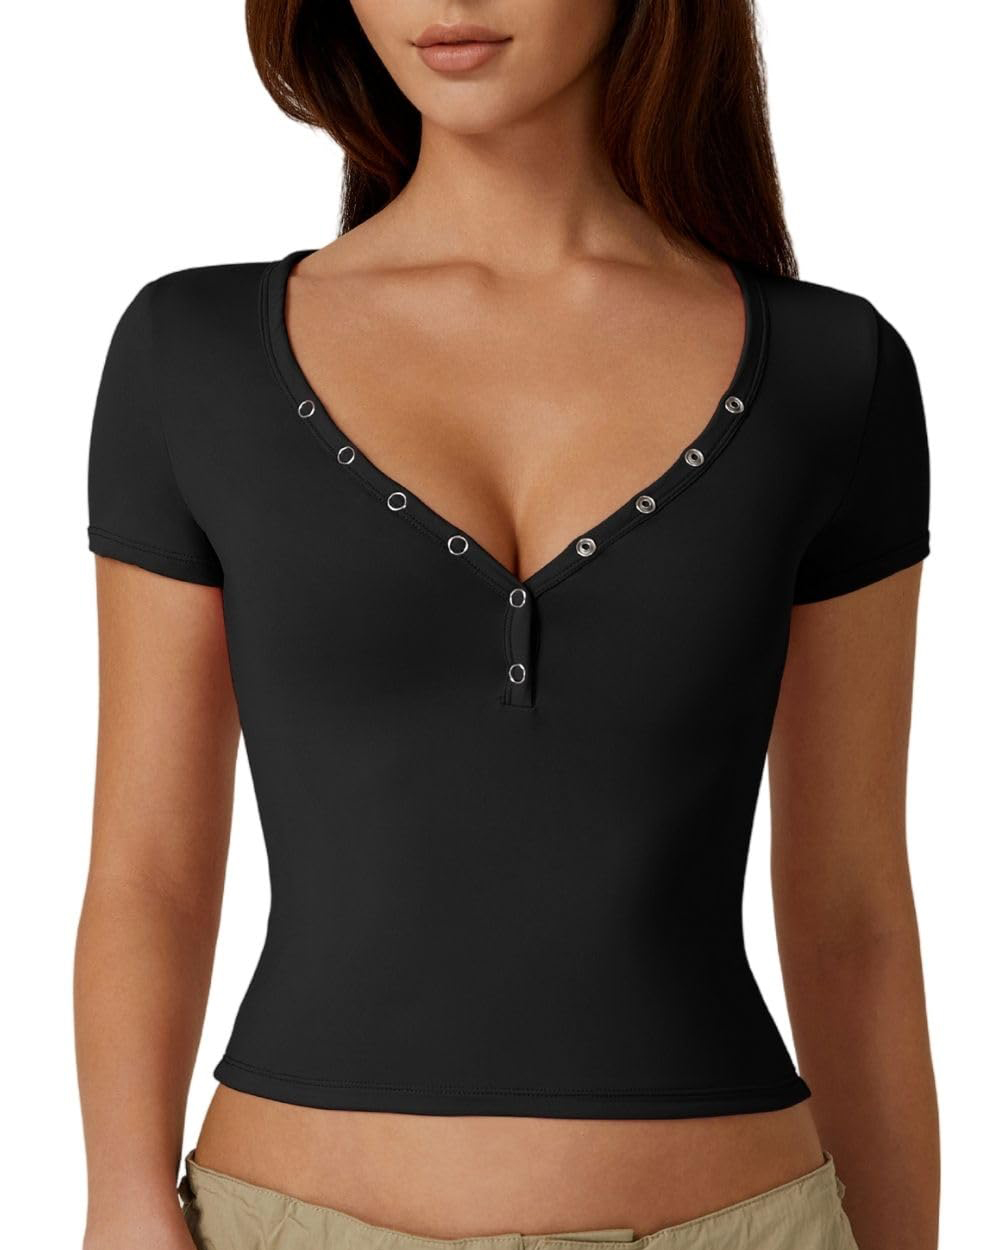 Women's Sexy Double Lined Button Up Slim Fit Crop Top